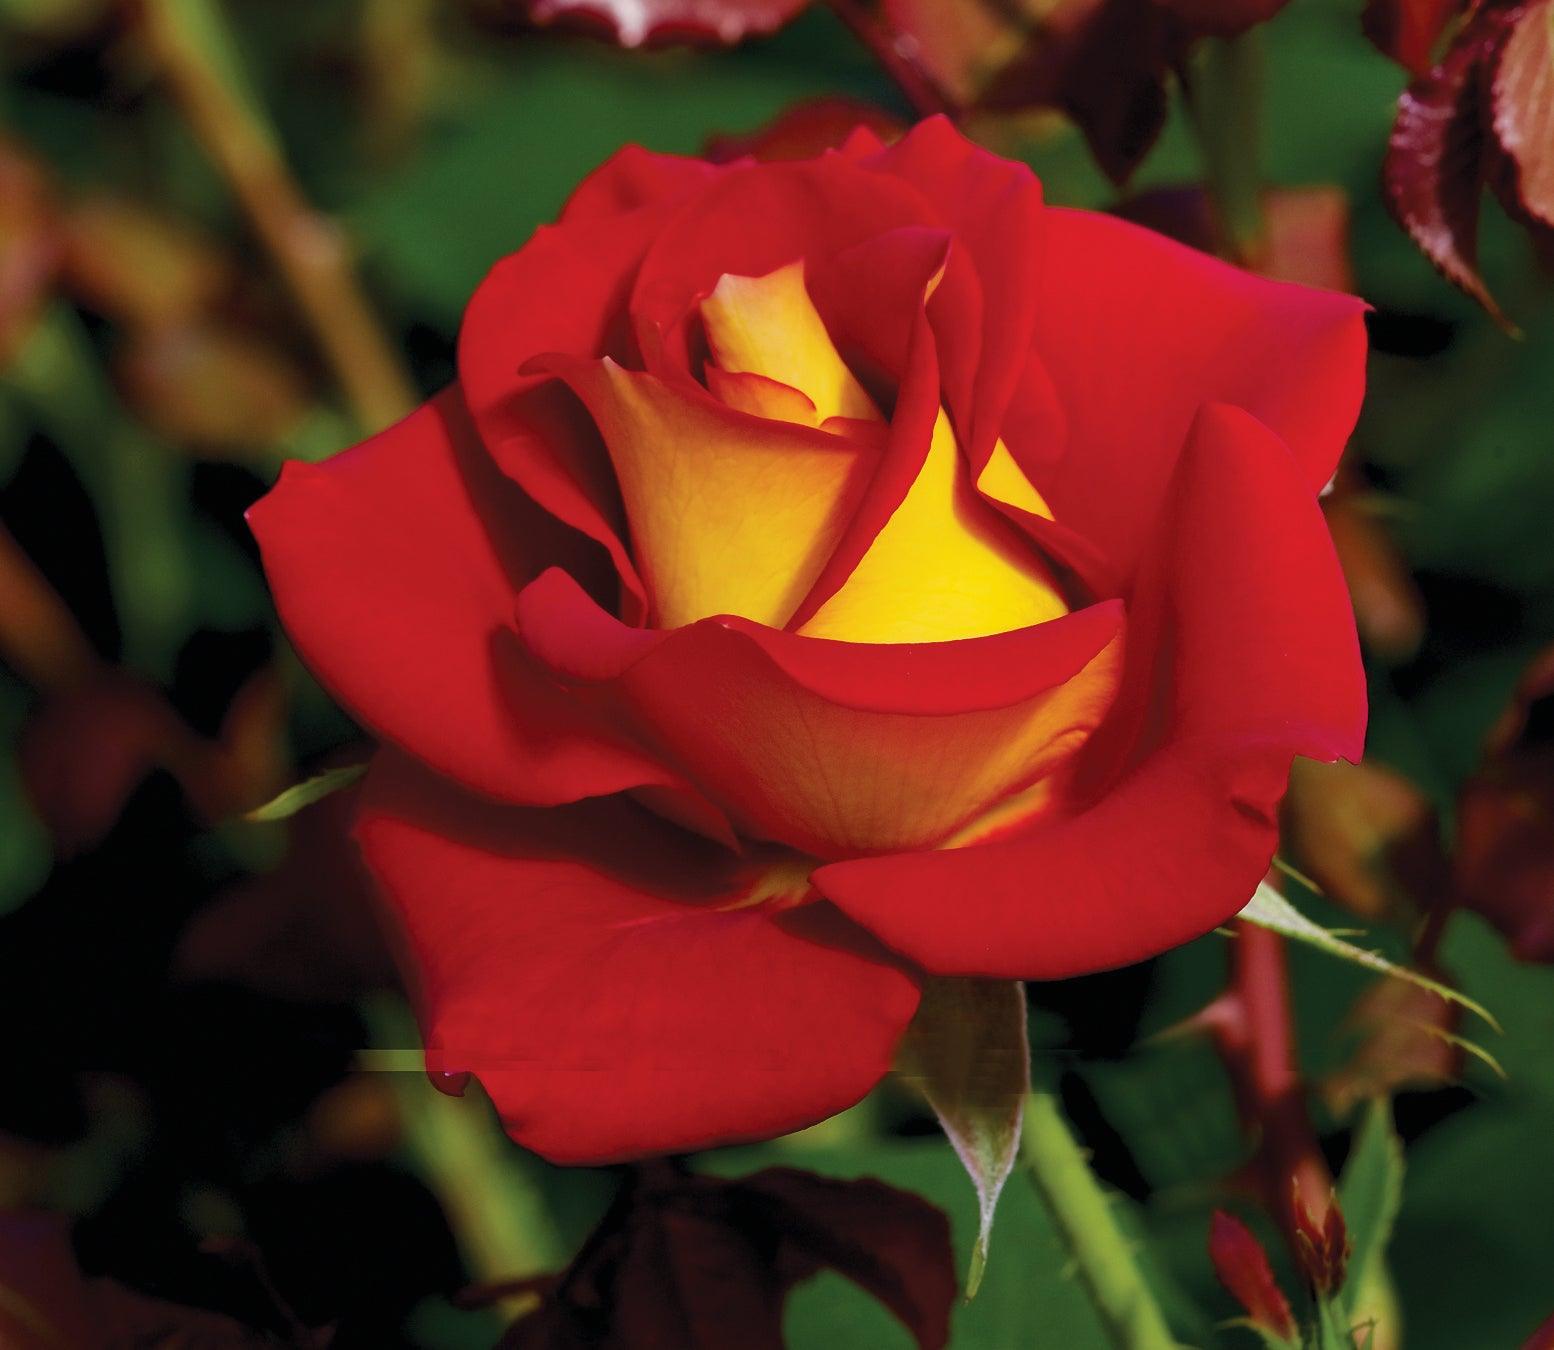 This unique rose variety features an eye-catching combination of the brightest red petals contrasted against a backdrop of the deepest yellow hues. The stunning blooms atop the glossy, green leaves create a striking visual contrast that is sure to command attention. What sets this rose apart is its ability to maintain its vivid colors from bud to bloom, ensuring a long-lasting display of bold and beautiful tones. 